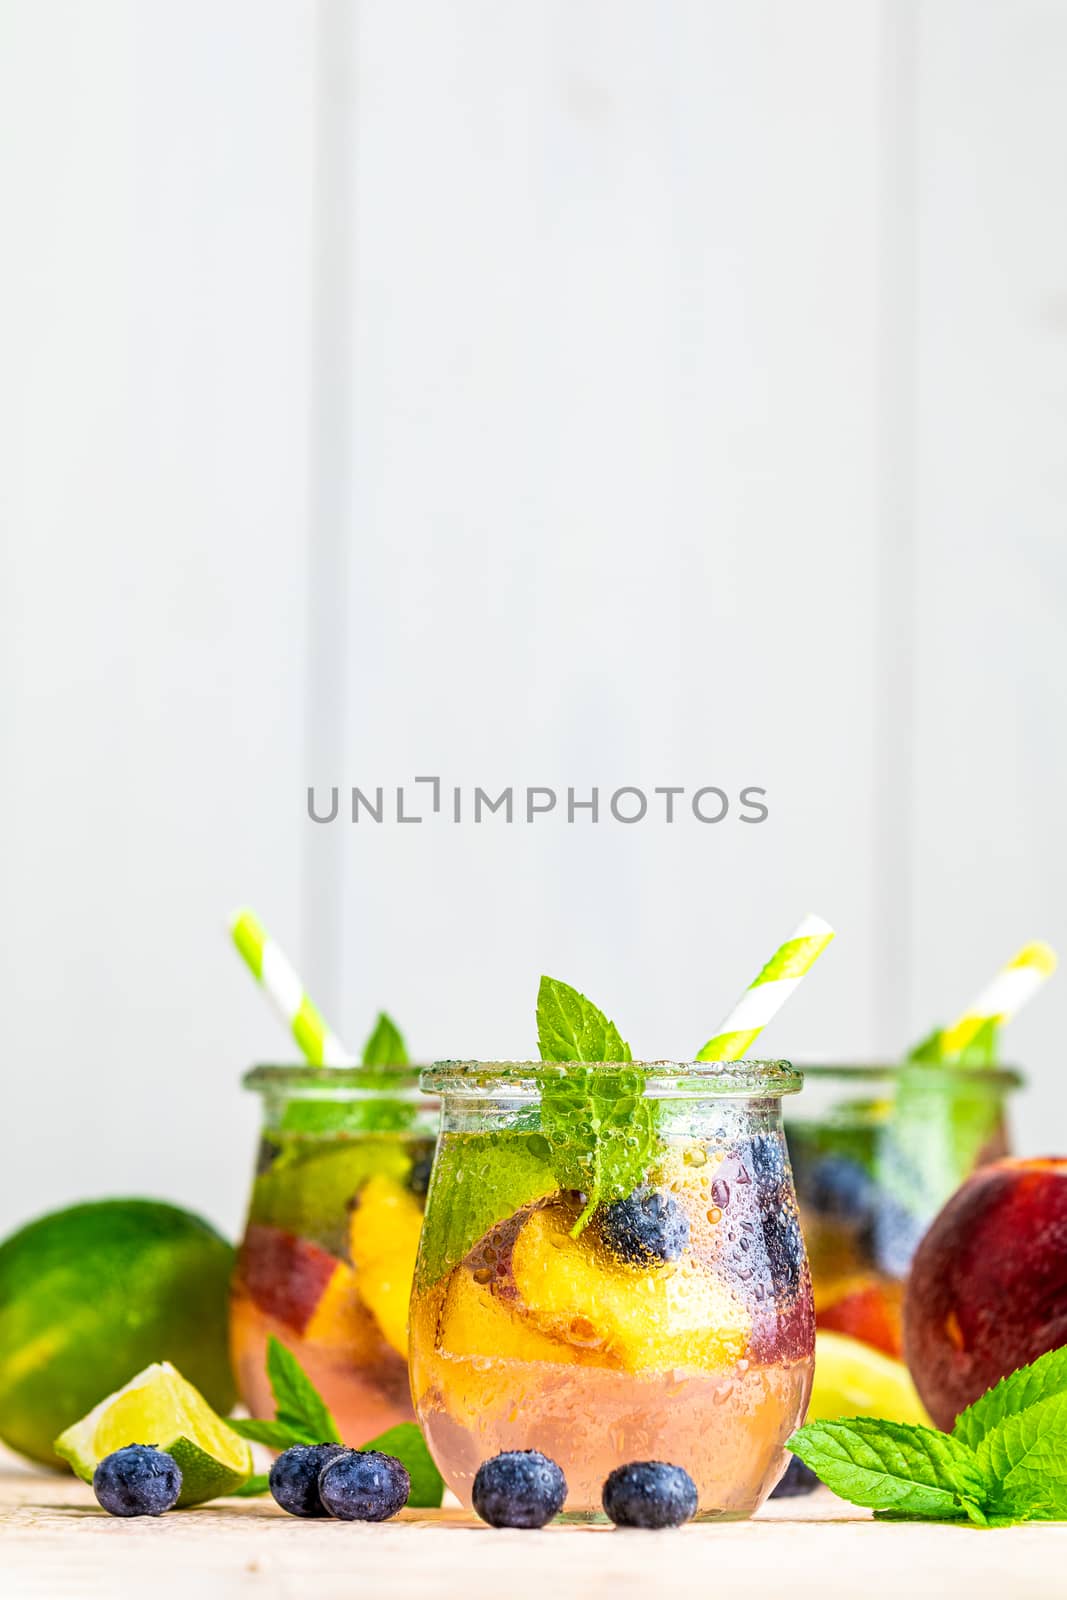 Blueberry and peach infused water, cocktail, lemonade or tea. Su by ArtSvitlyna